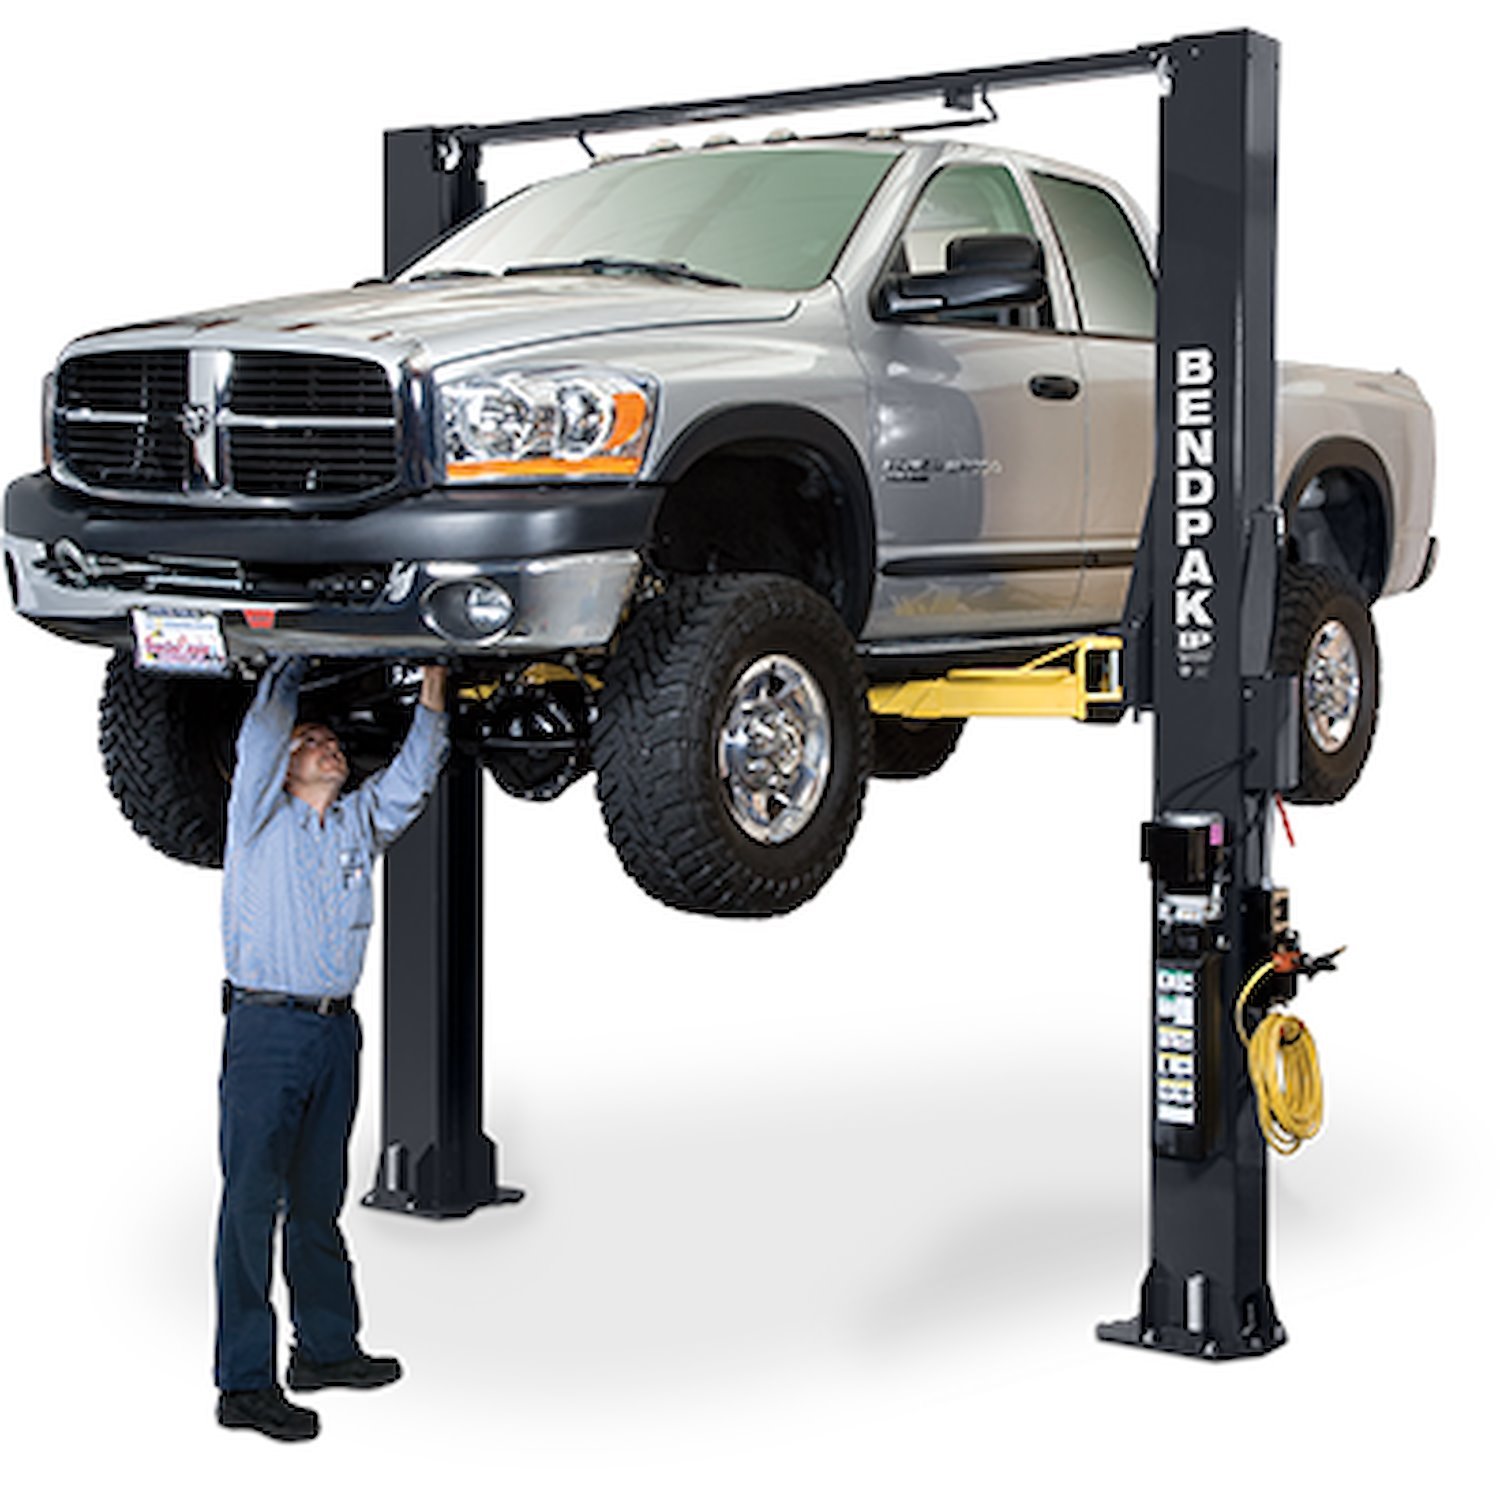 XPR-10S Two-Post Lift, Adjustable Width,10,000-lb. Capacity